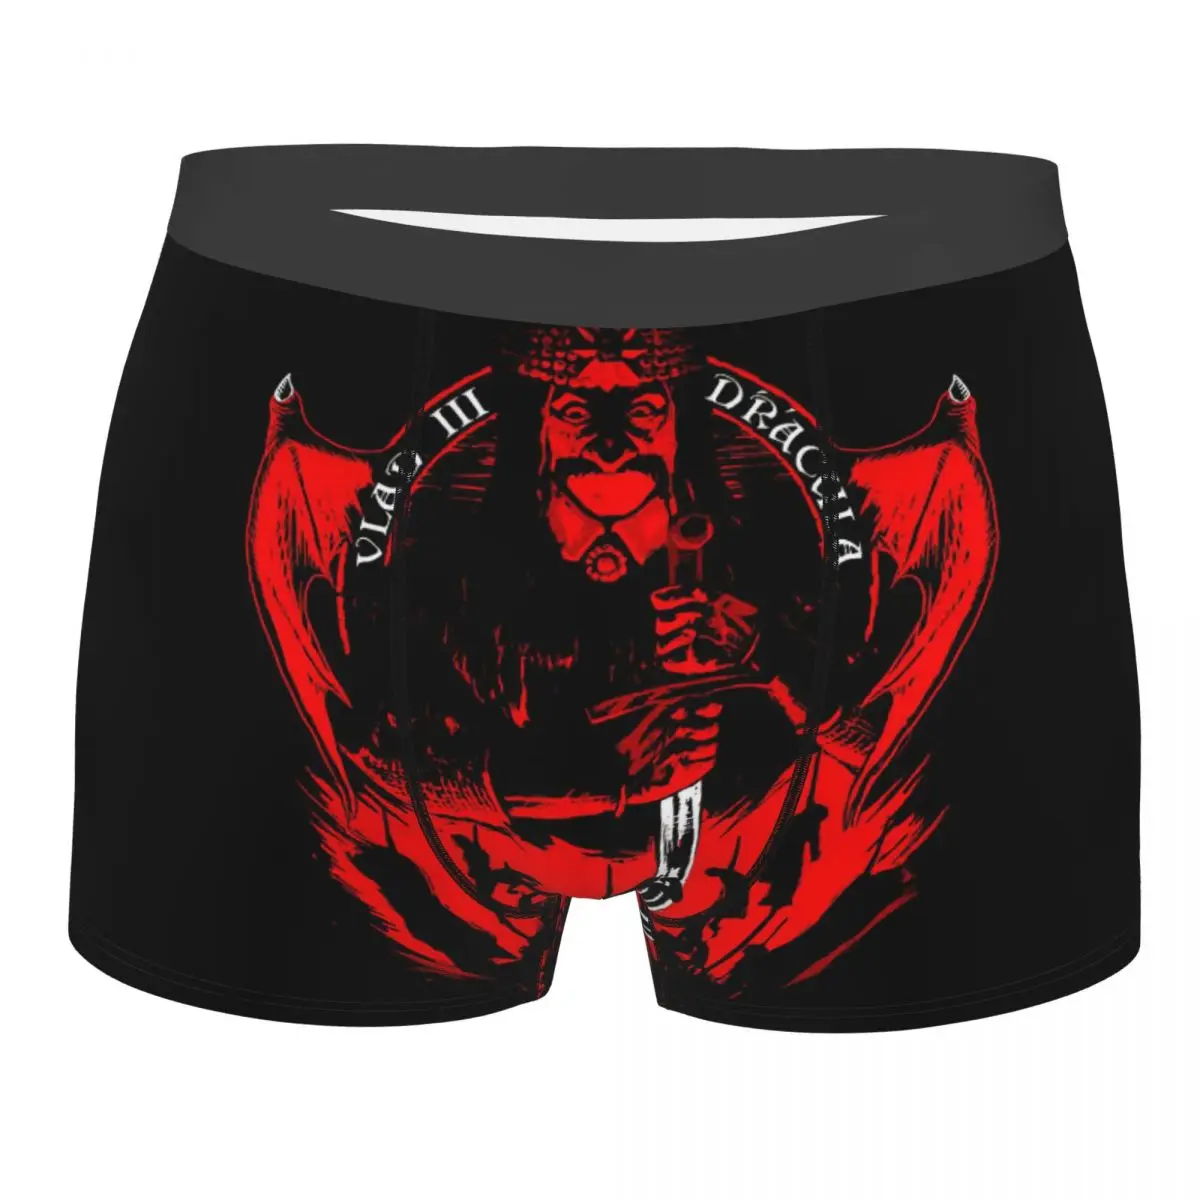 Vlad The Impaler Dracula Man'scosy Boxer Briefs Underwear Highly Breathable High Quality Gift Idea dracula the resurrection pc